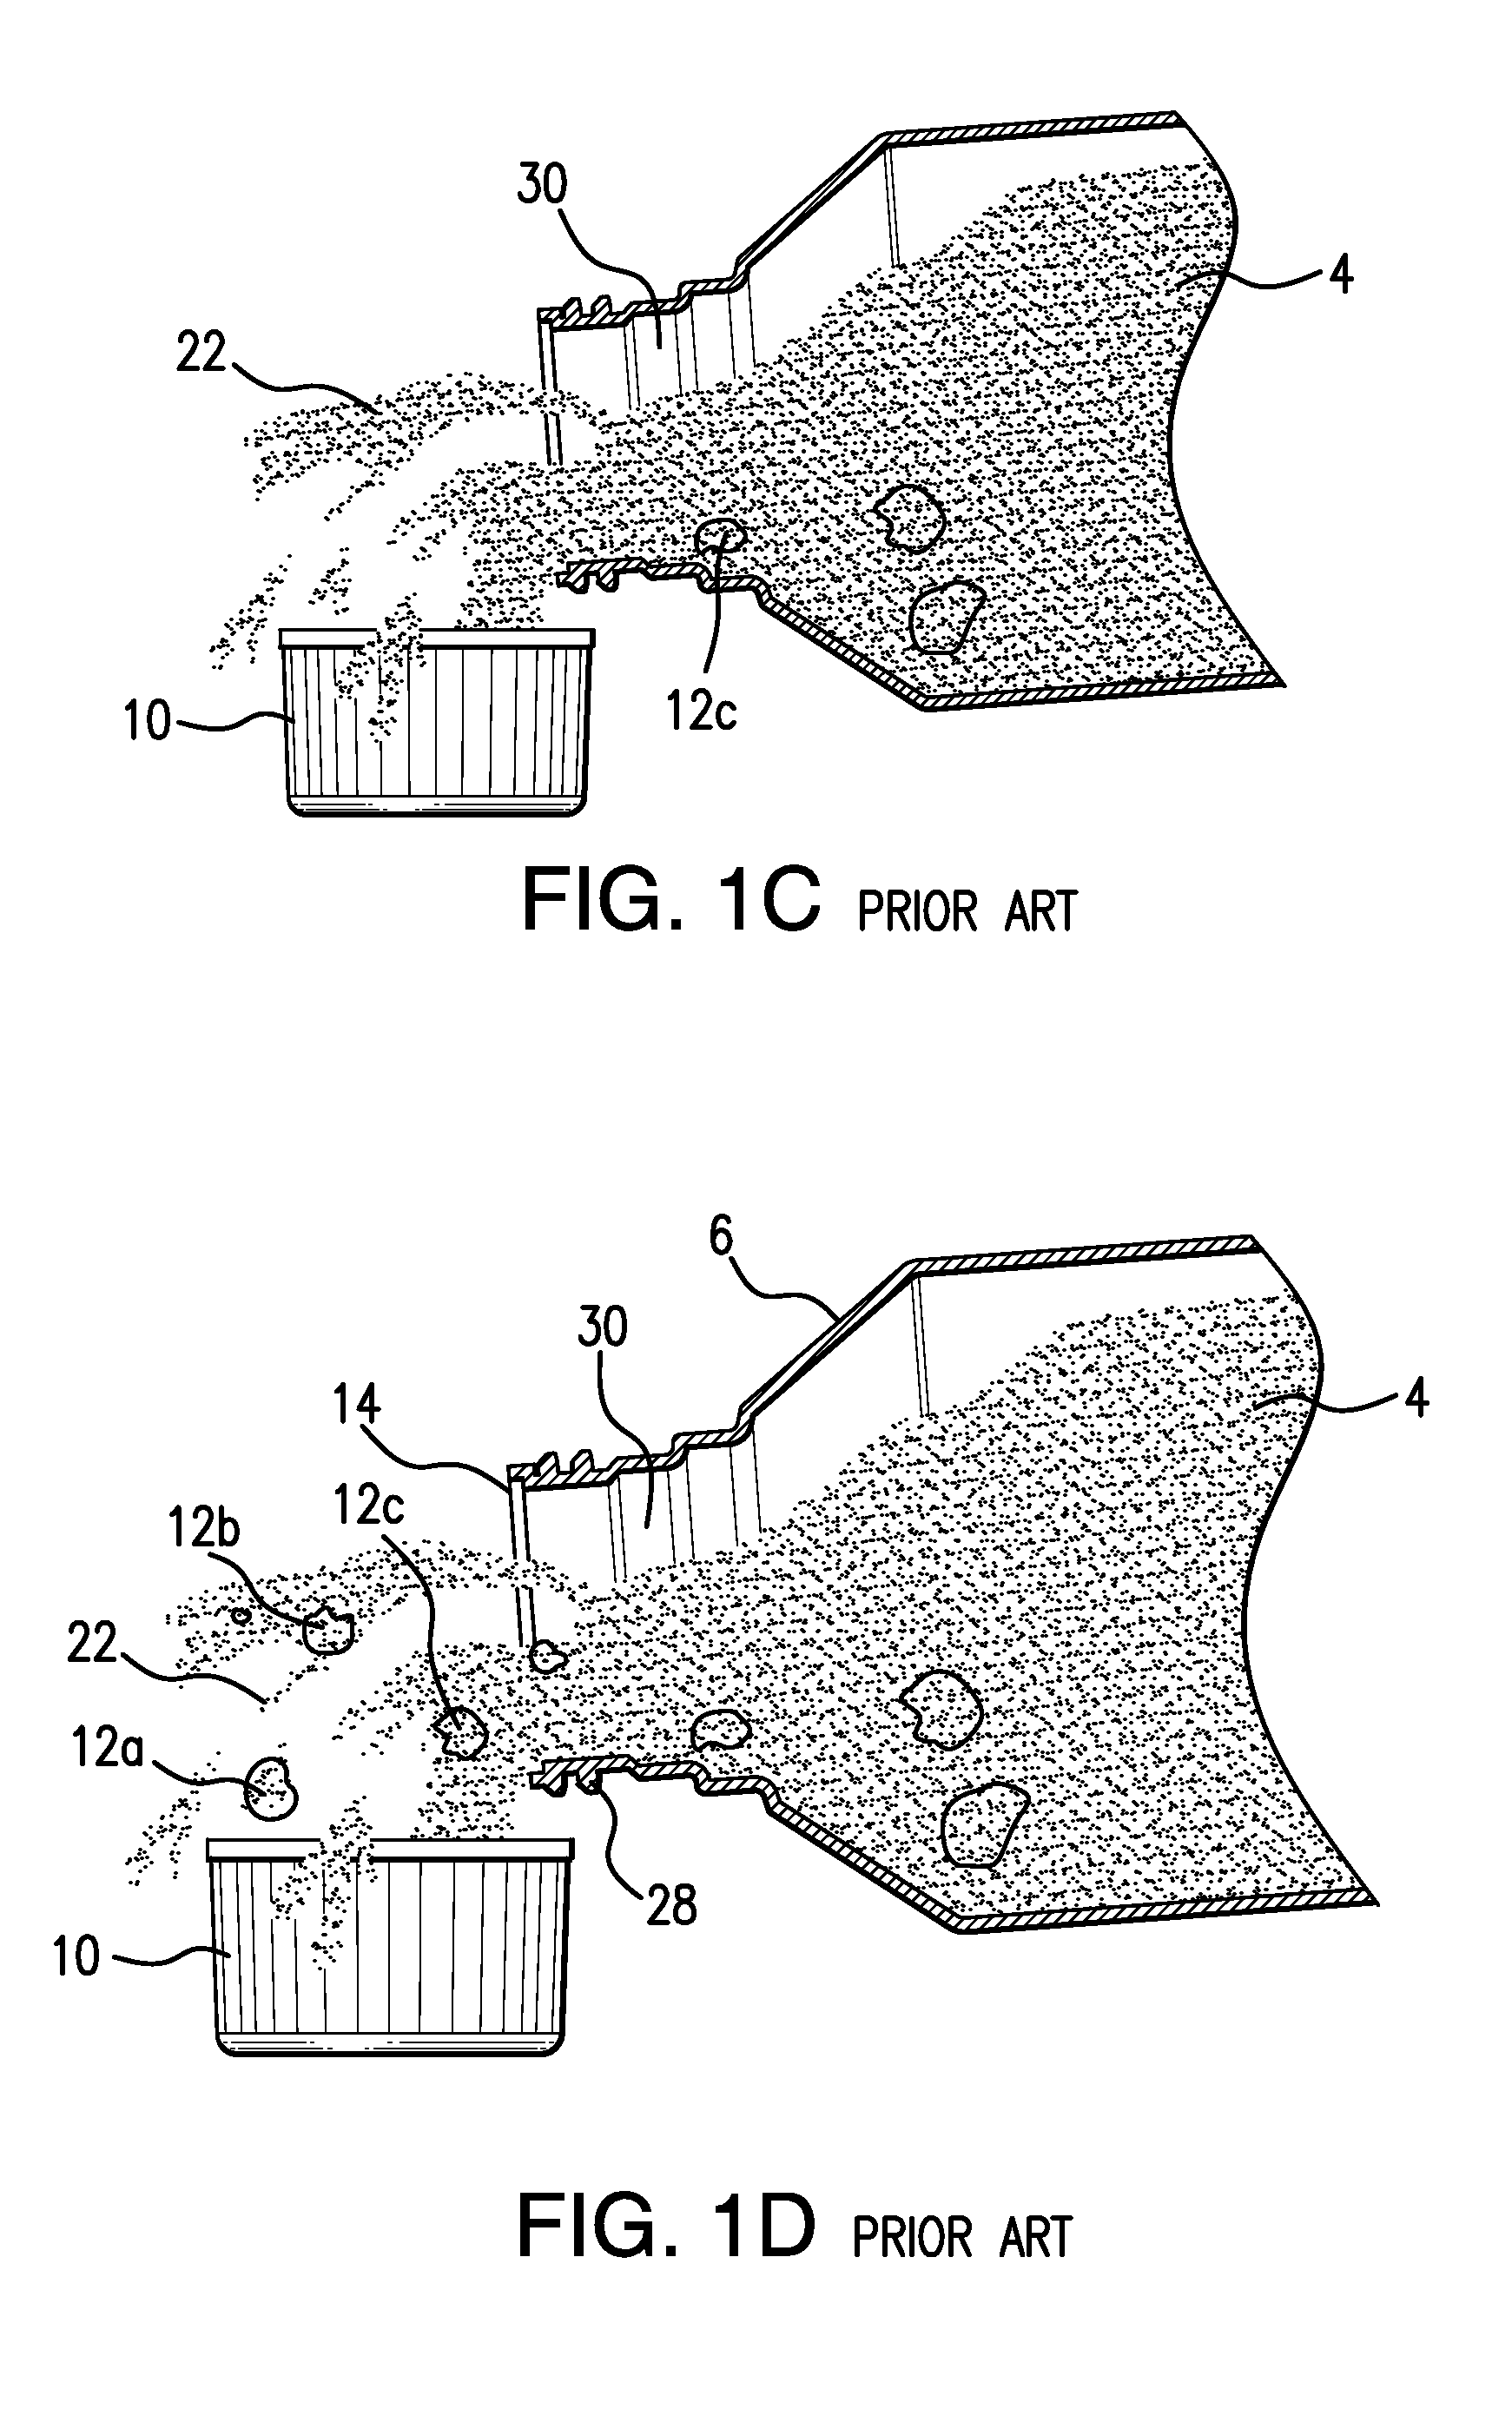 Fitment and container for powdered products, especially powdered products prone to clumping behavior